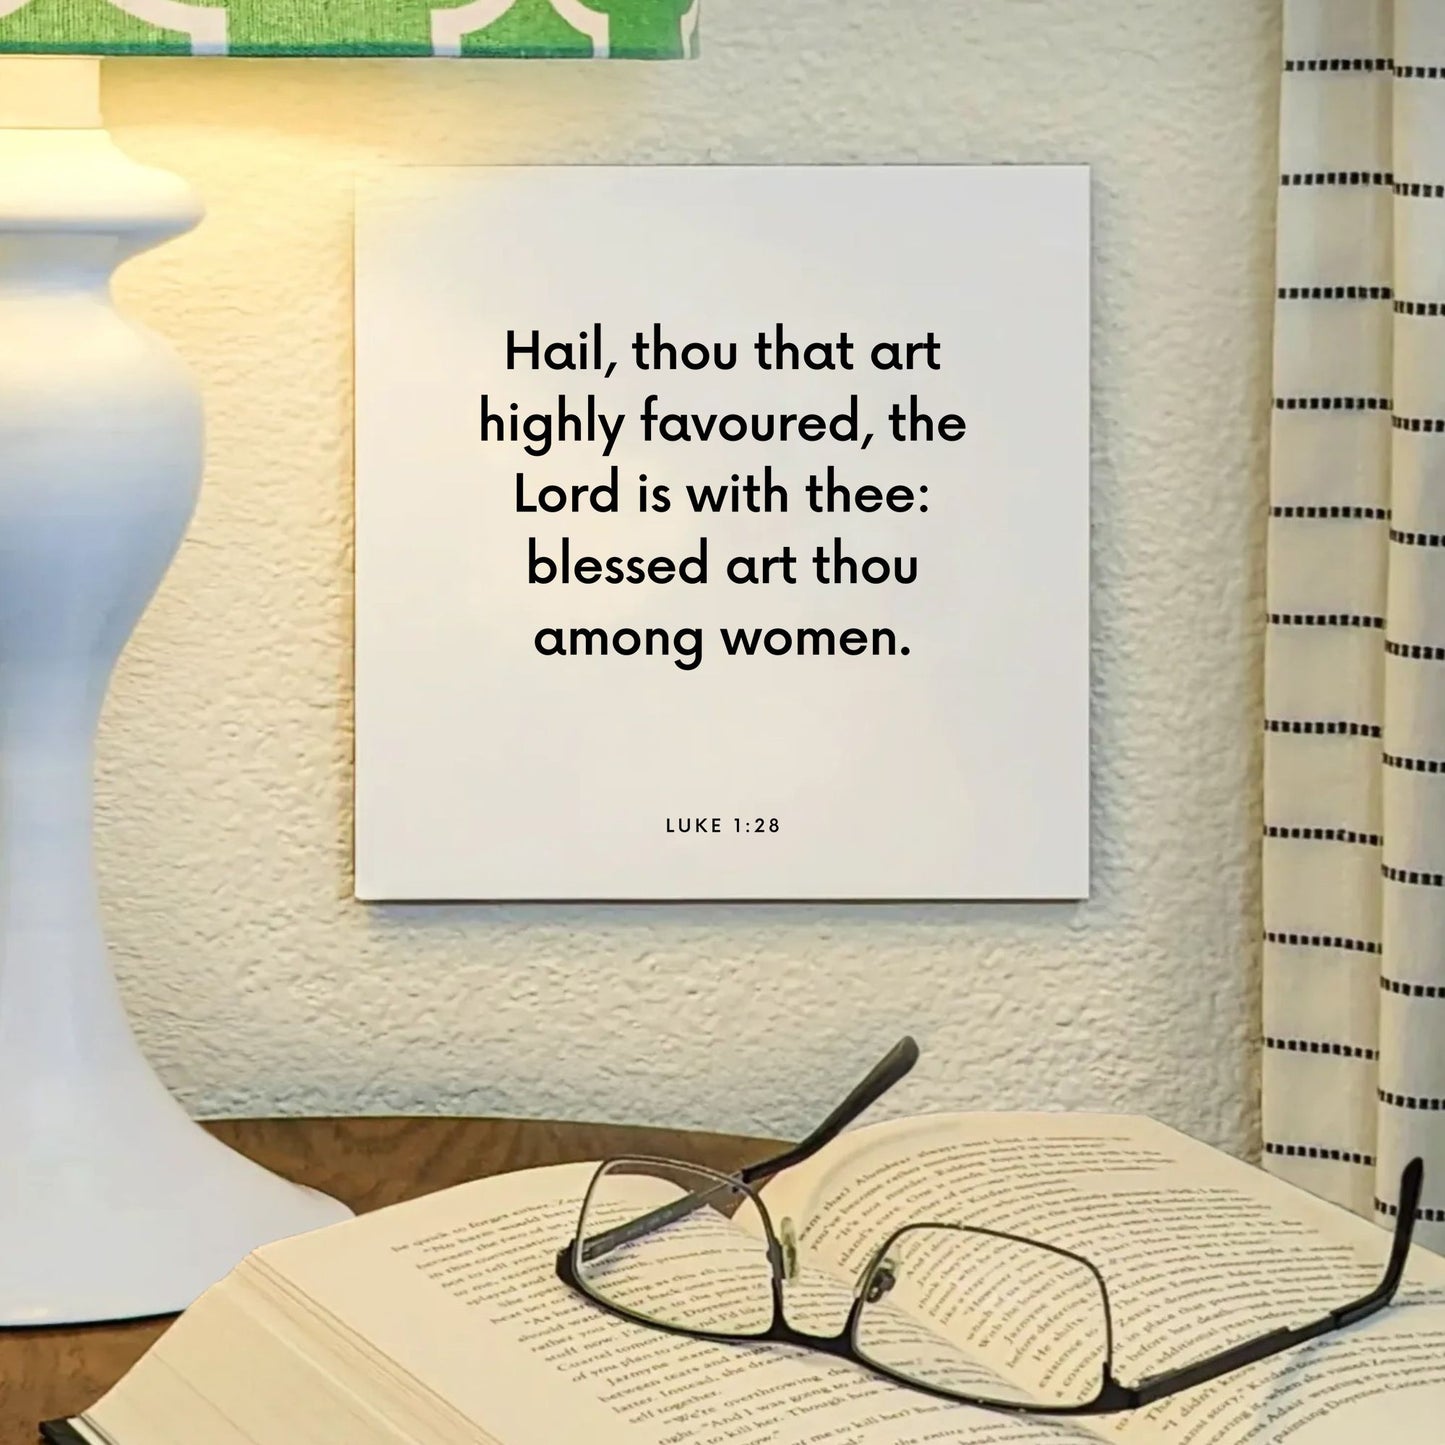 Lamp mouting of the scripture tile for Luke 1:28 - "Hail, thou that art highly favoured"